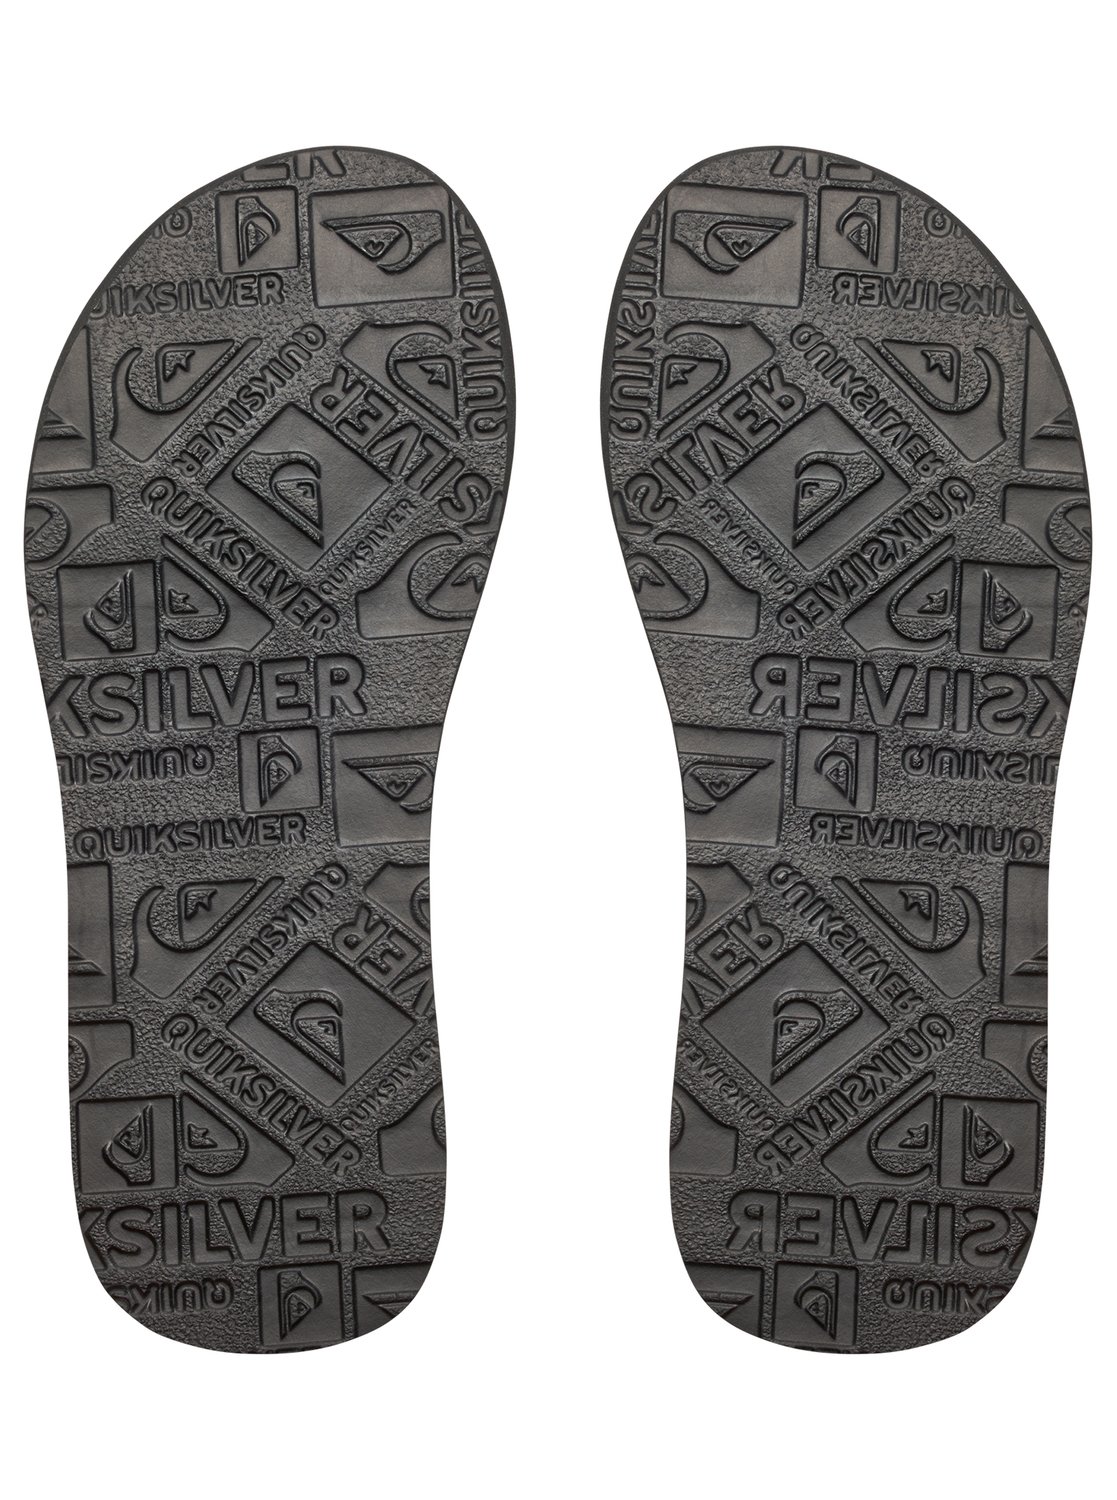  Quiksilver  Carver Suede Youth Sandal  eBay